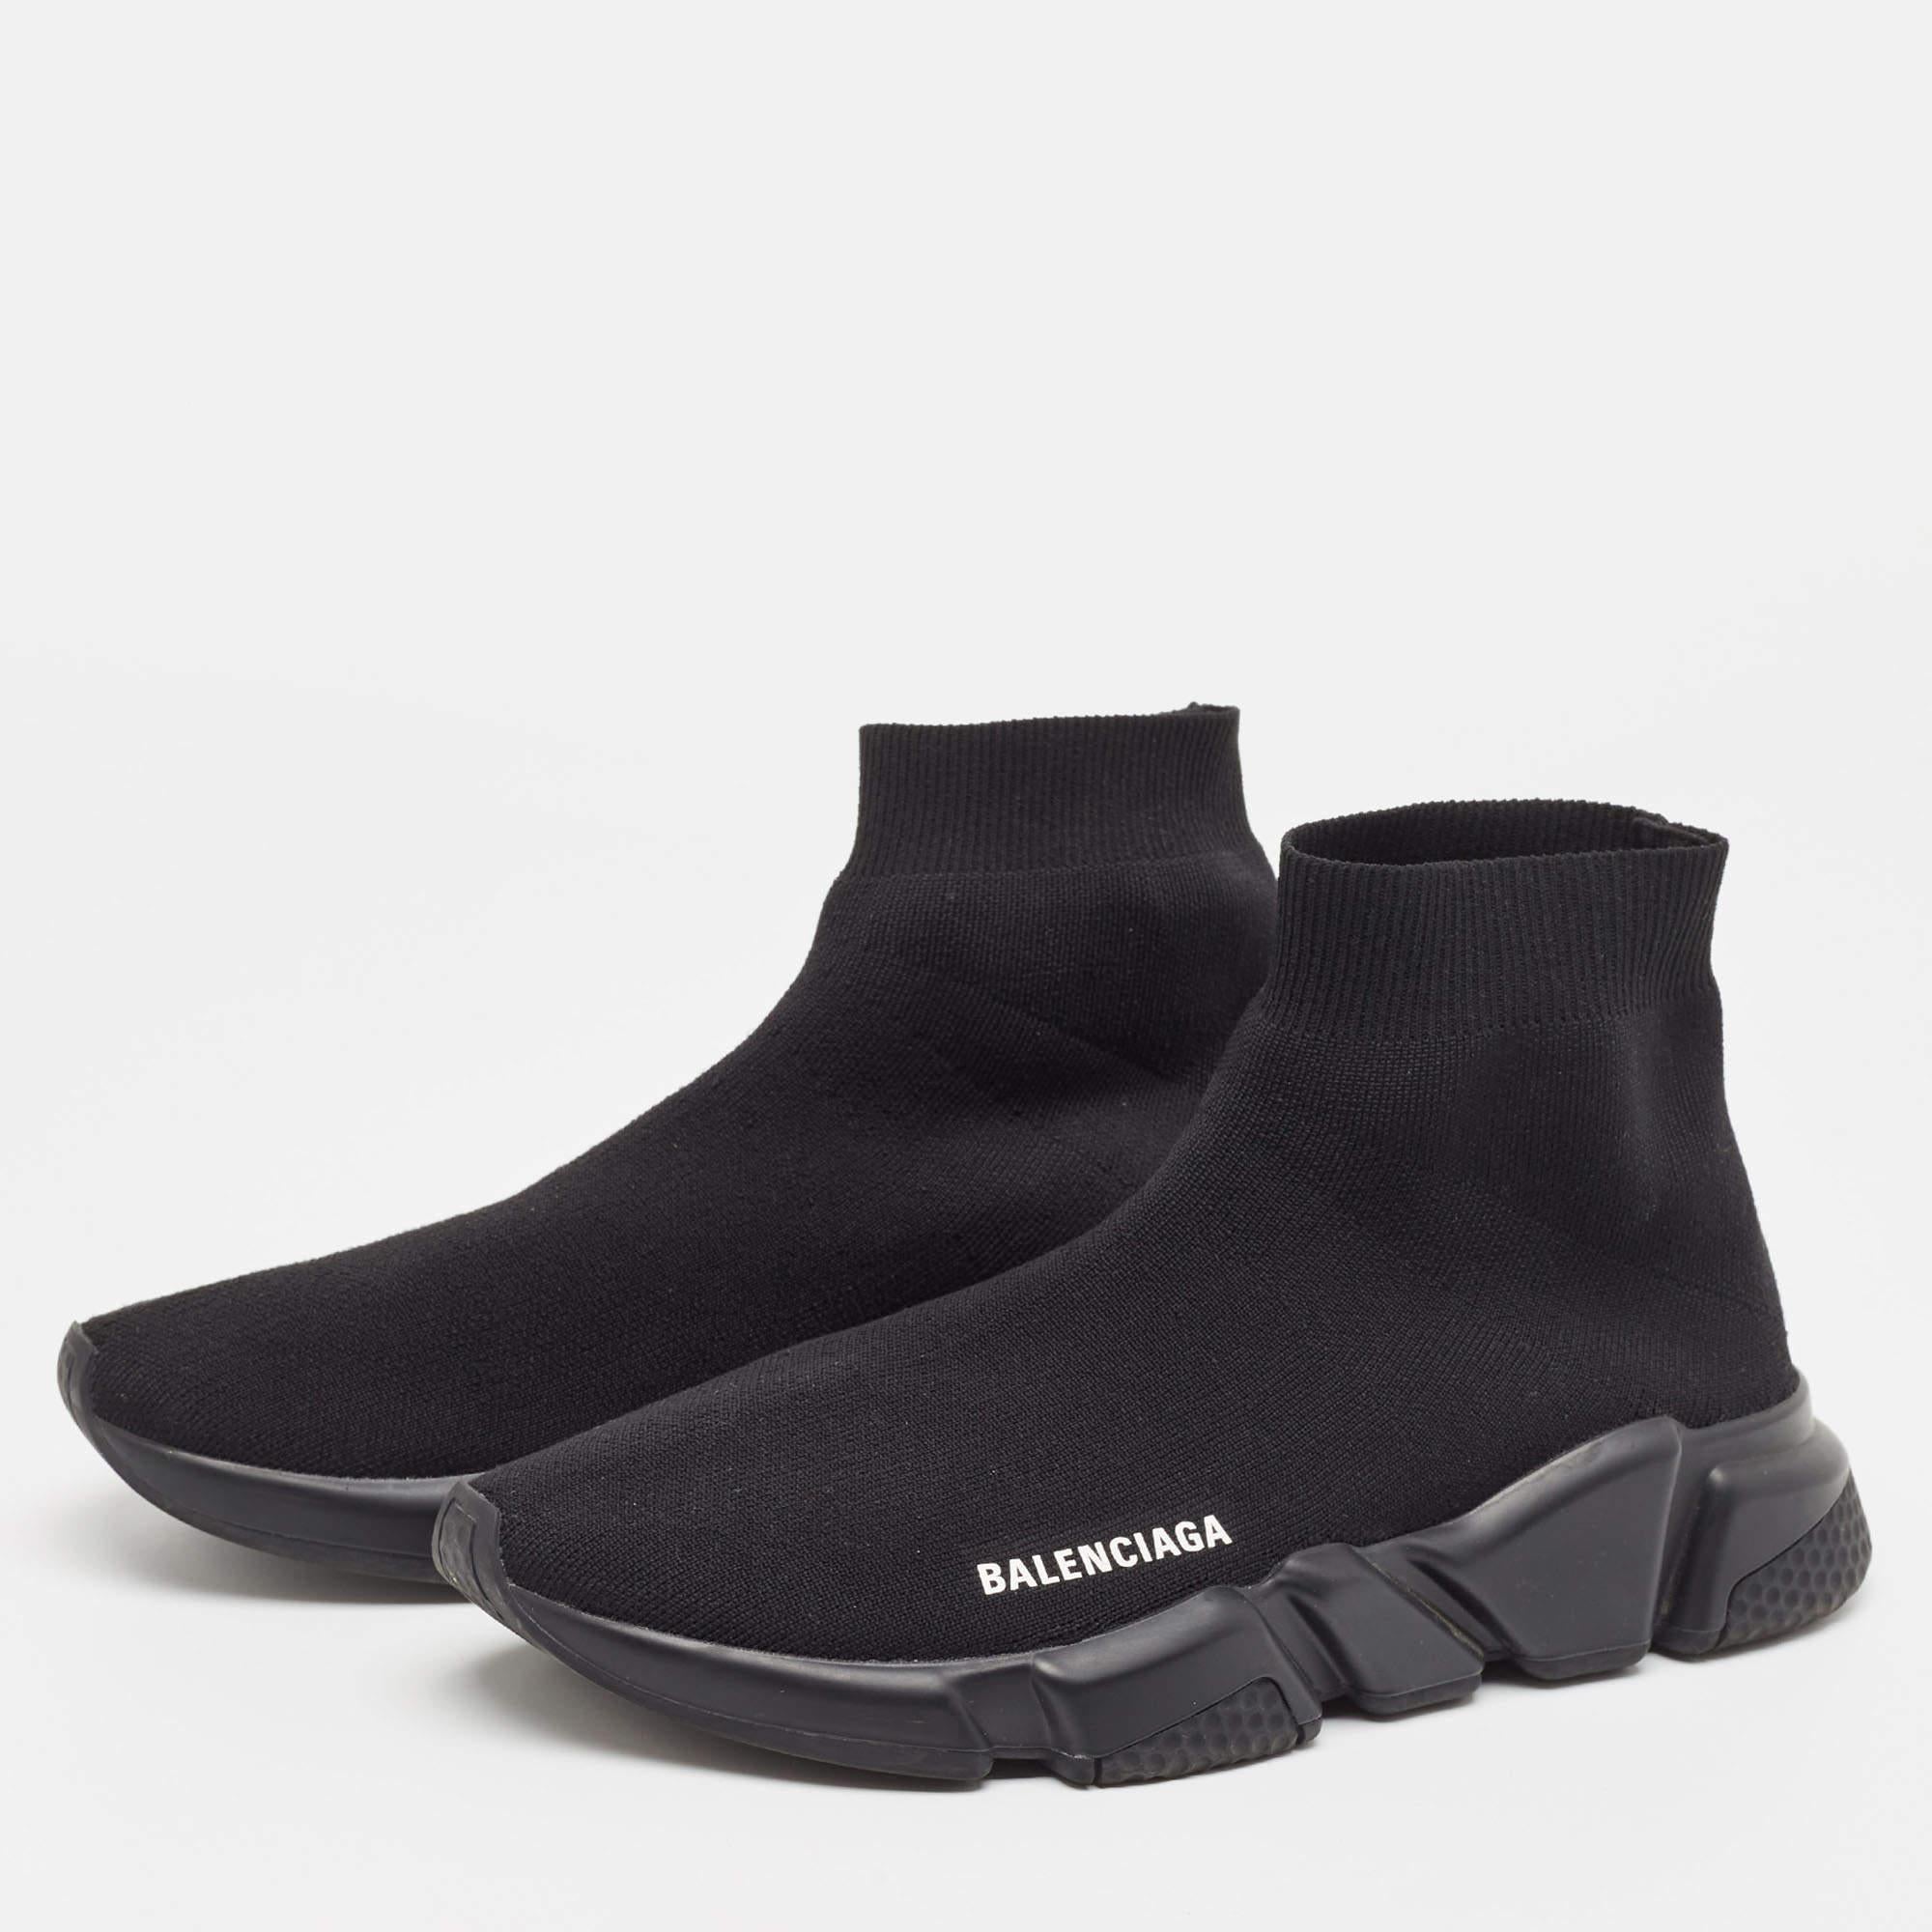 Balenciaga Black Knit Fabric Speed Trainer Sneakers Size 41 For Sale 3